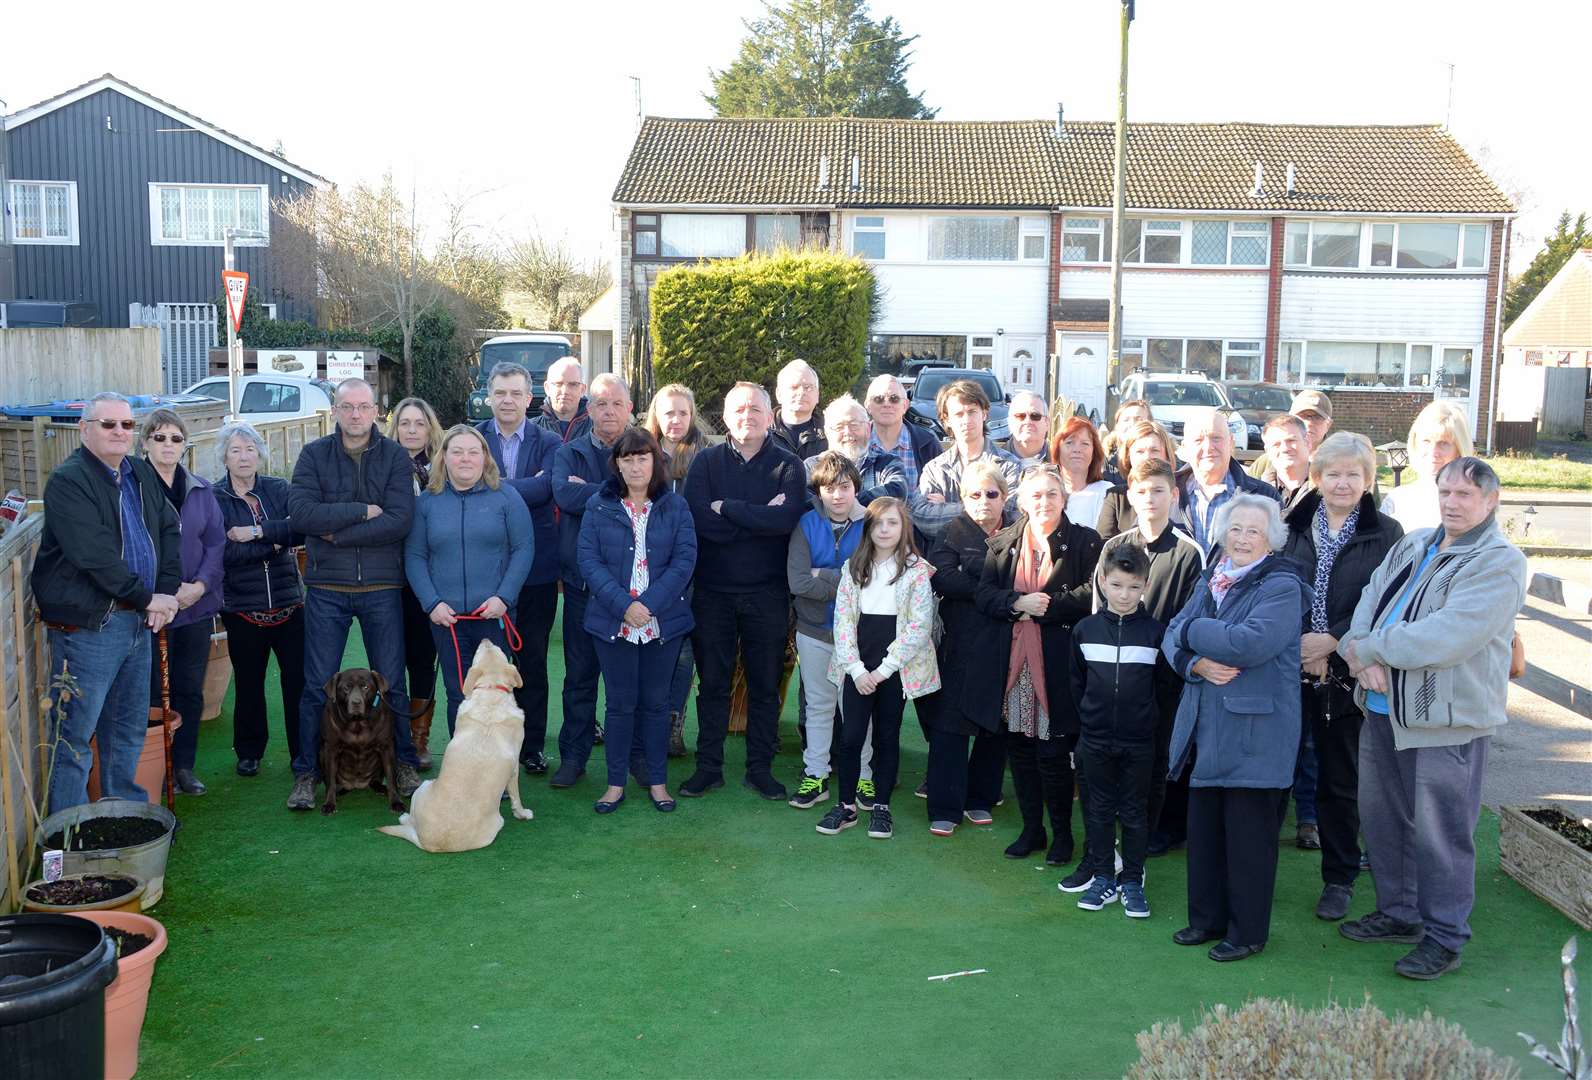 Kingsnorth residents, pictured here in 2019, have long campaigned against the development